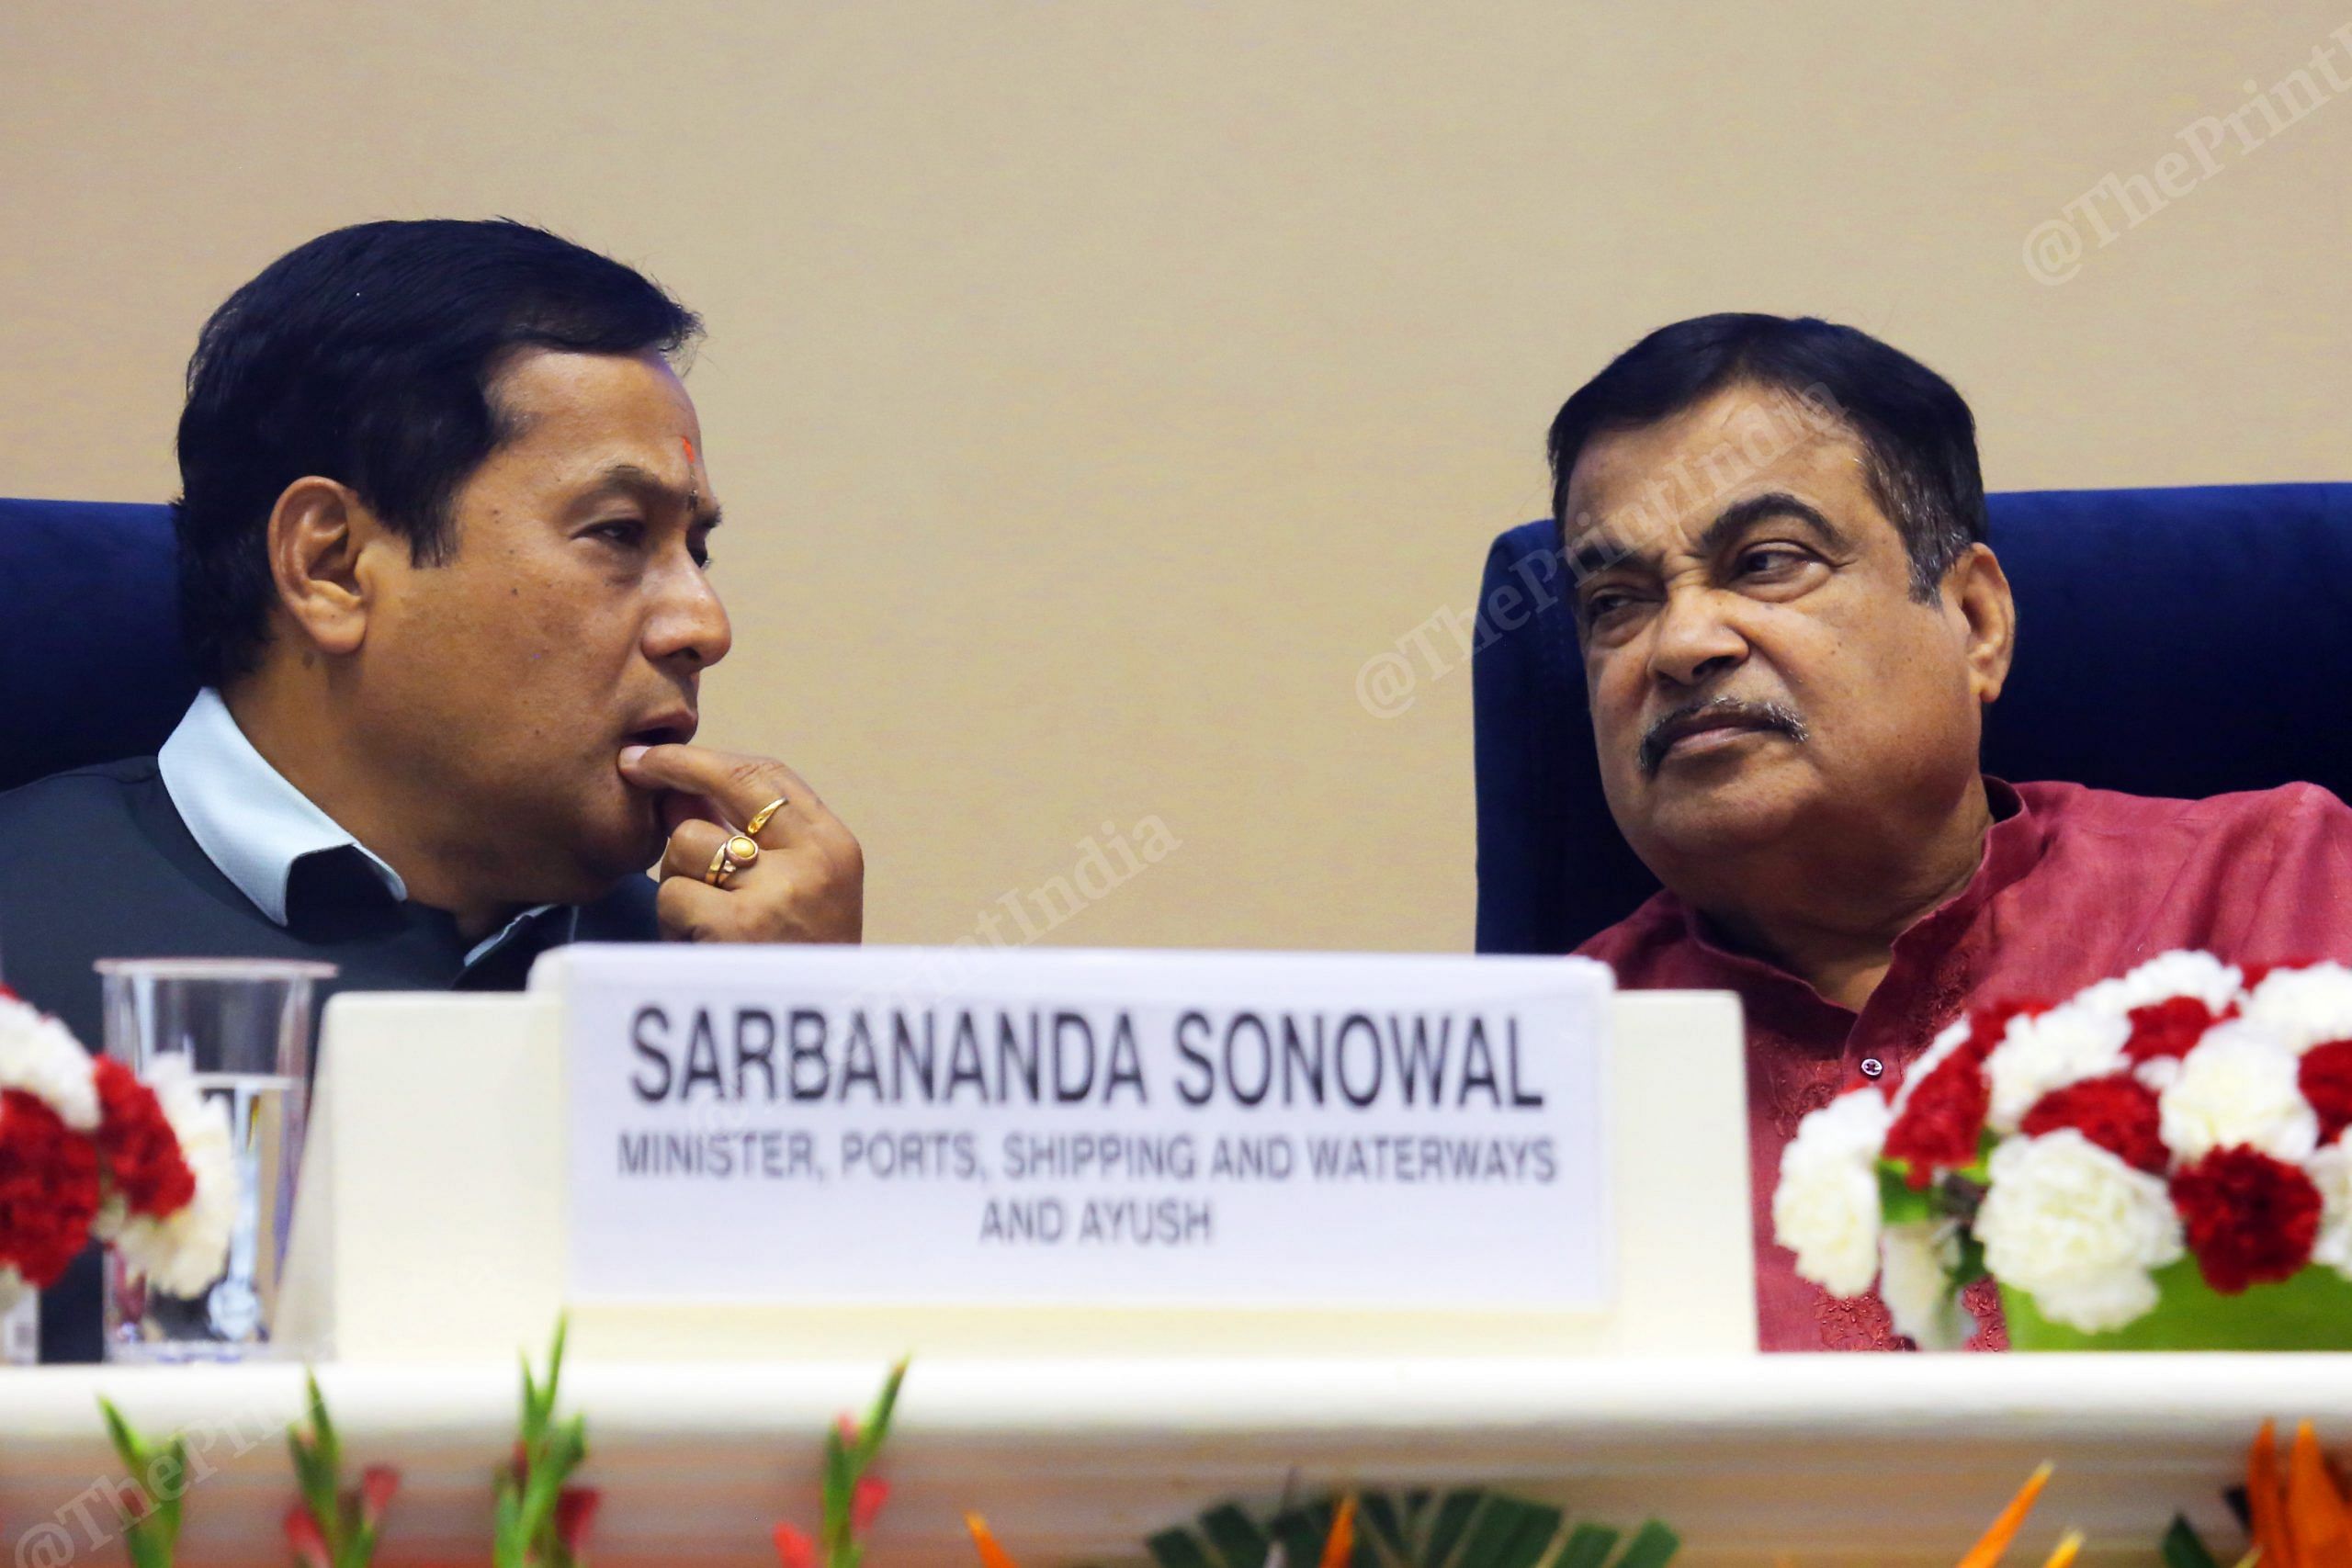 Minister of Ports, Shipping and Waterways, Sarbananda Sonowal, with Minister of Road Transport & Highways, Nitin Gadkari, at the launch| Photo: Praveen Jain | ThePrint